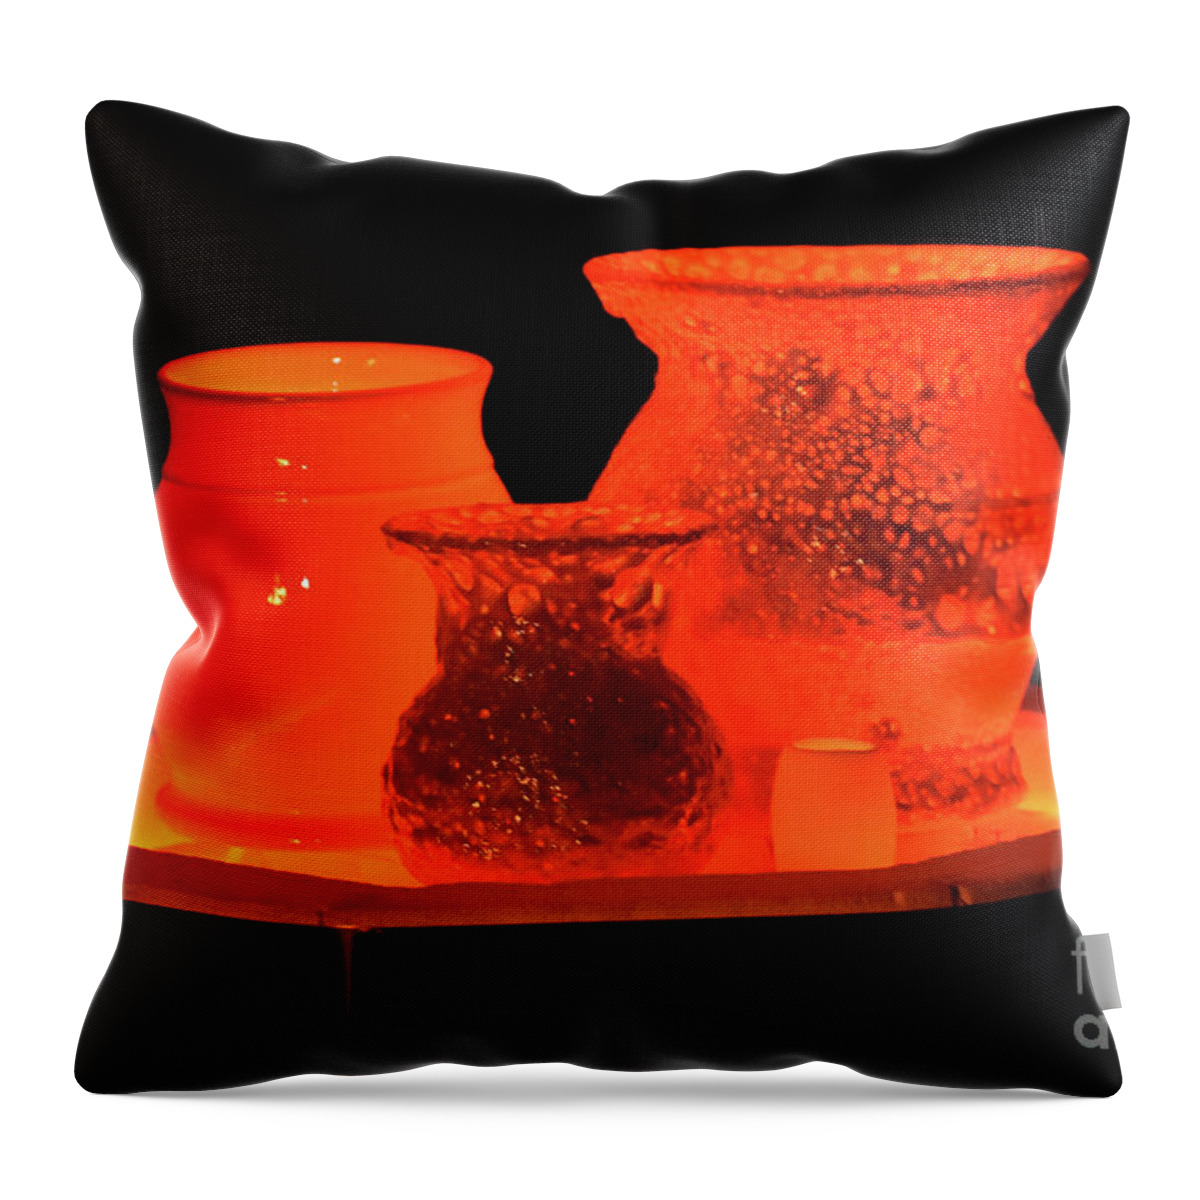 Intense Throw Pillow featuring the photograph Hot Pots by Skip Willits